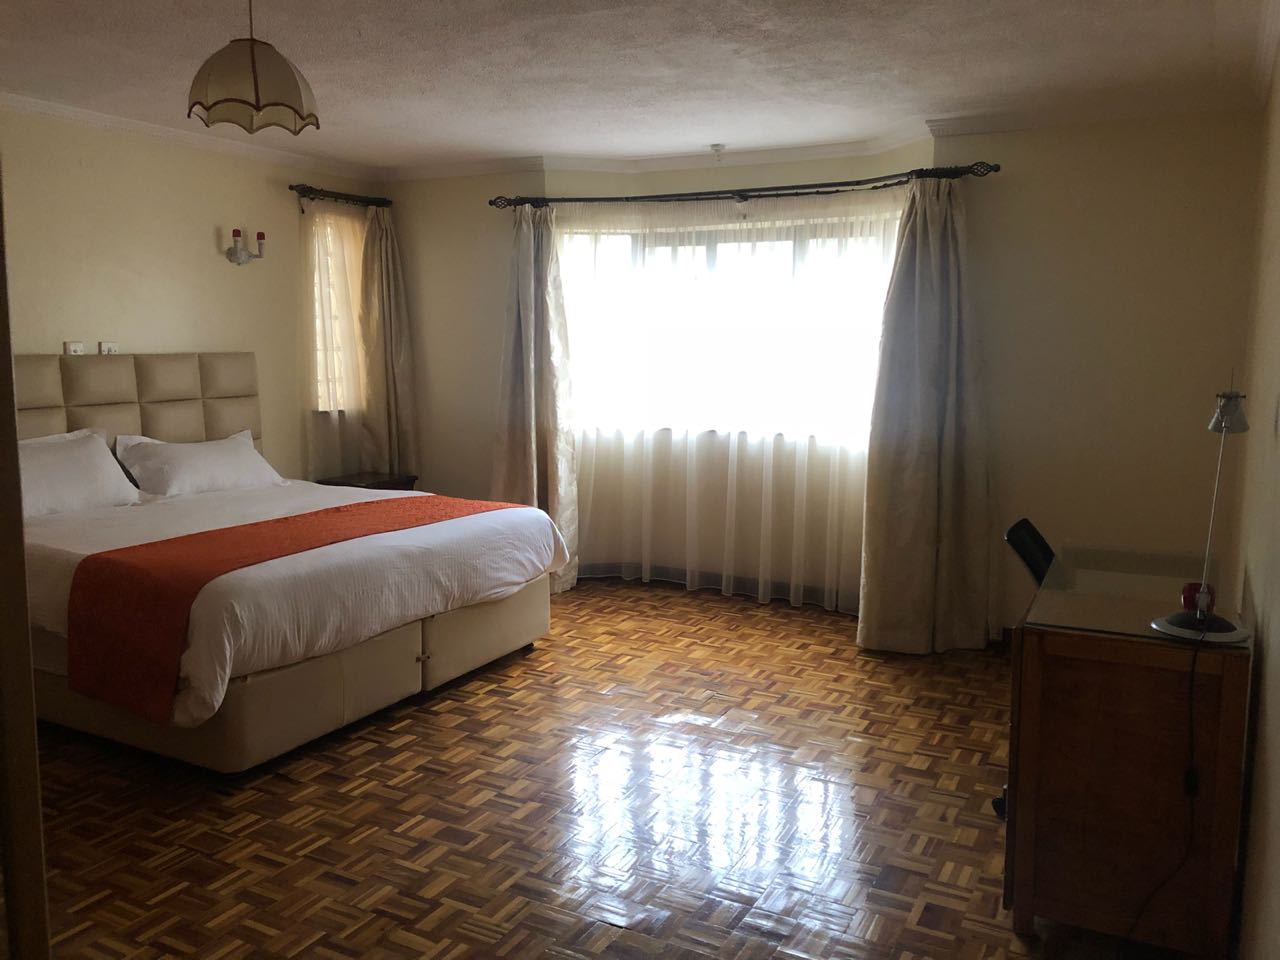 3 Bedroom Fully Furnished Apartment Located in Kilimani, Off Lenana Road, To Let at Ksh150k (6)